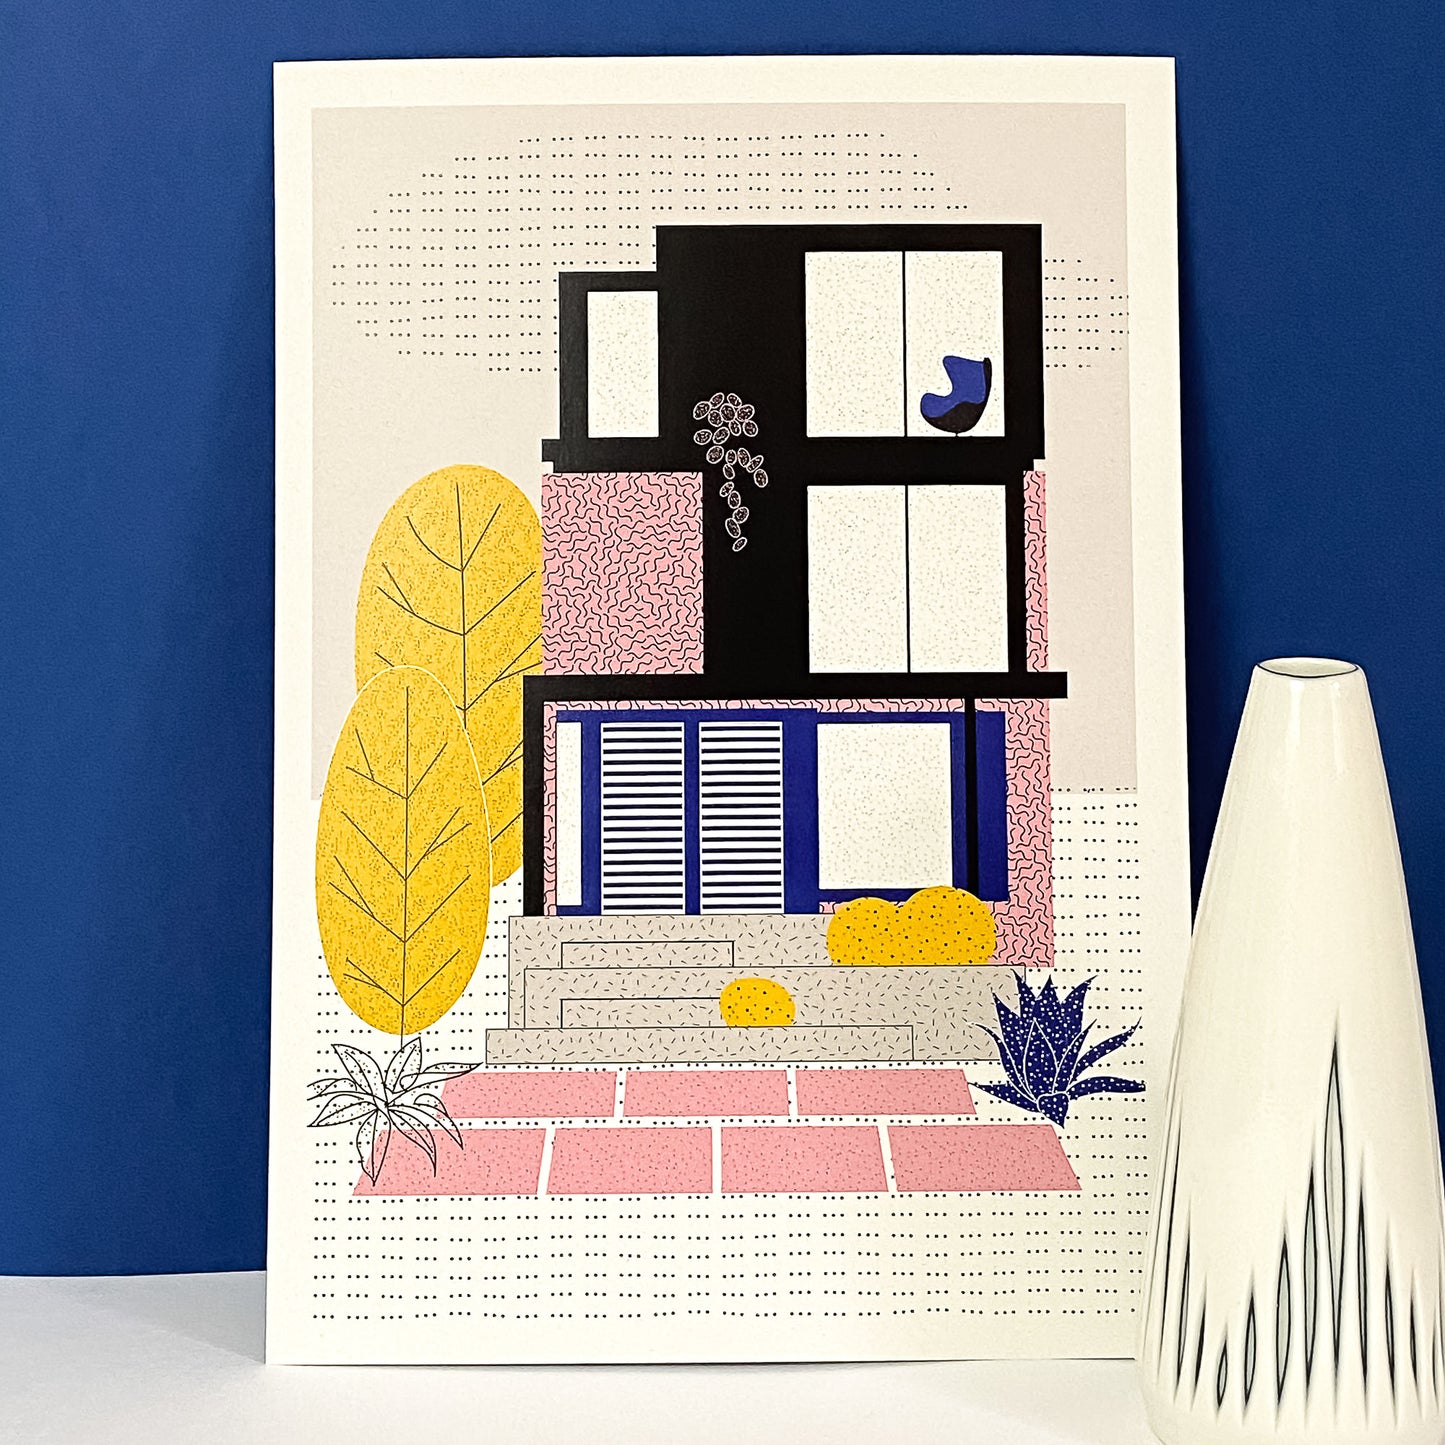 Pink Suburbs Art Print by The Print Lass. Shown unframed with vase (not included)